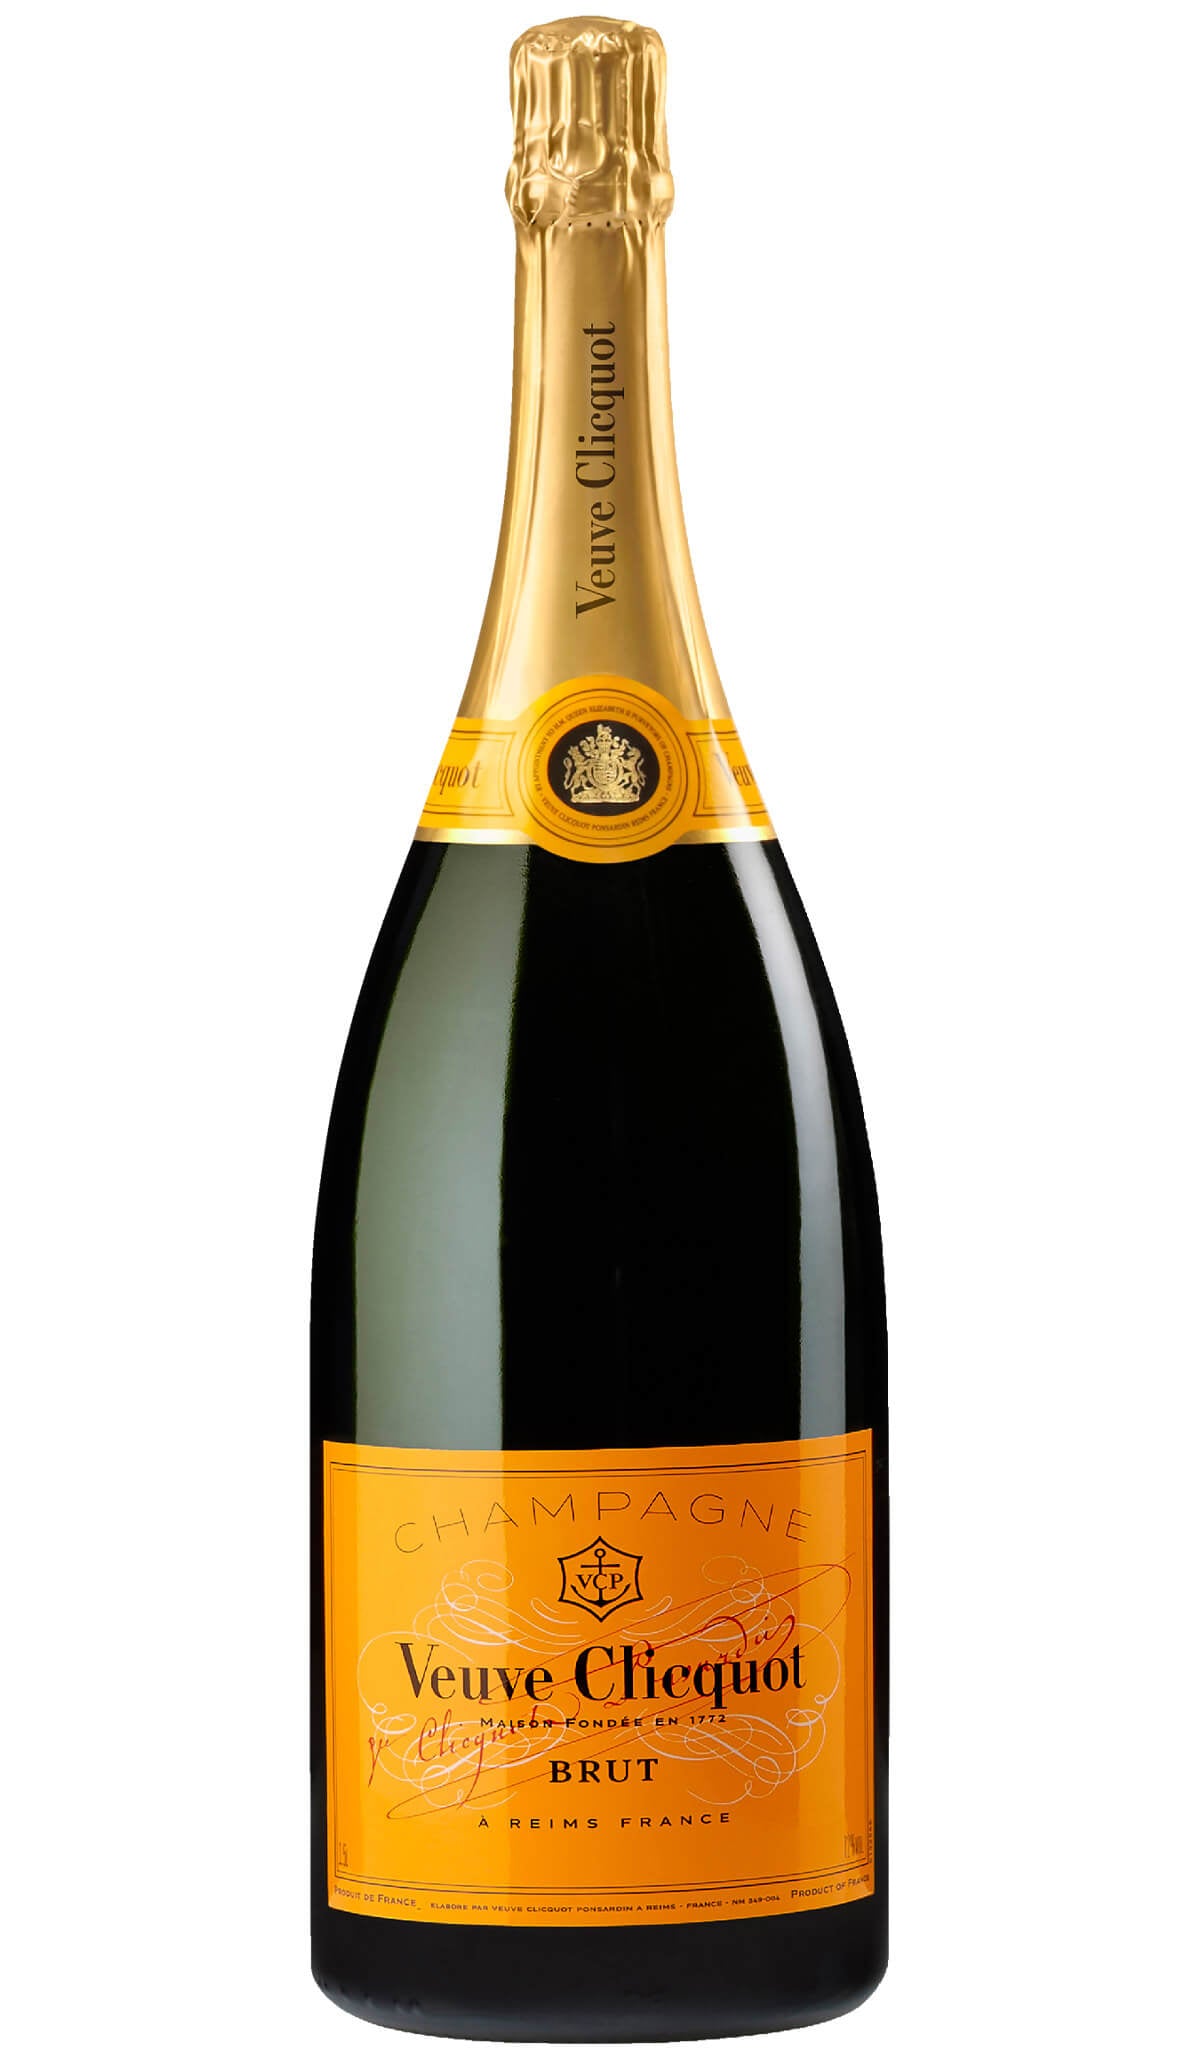 Find out more or buy Veuve Clicquot Yellow Label Brut 1.5L (Champagne, France, Magnum) online at Wine Sellers Direct - Australia’s independent liquor specialists.